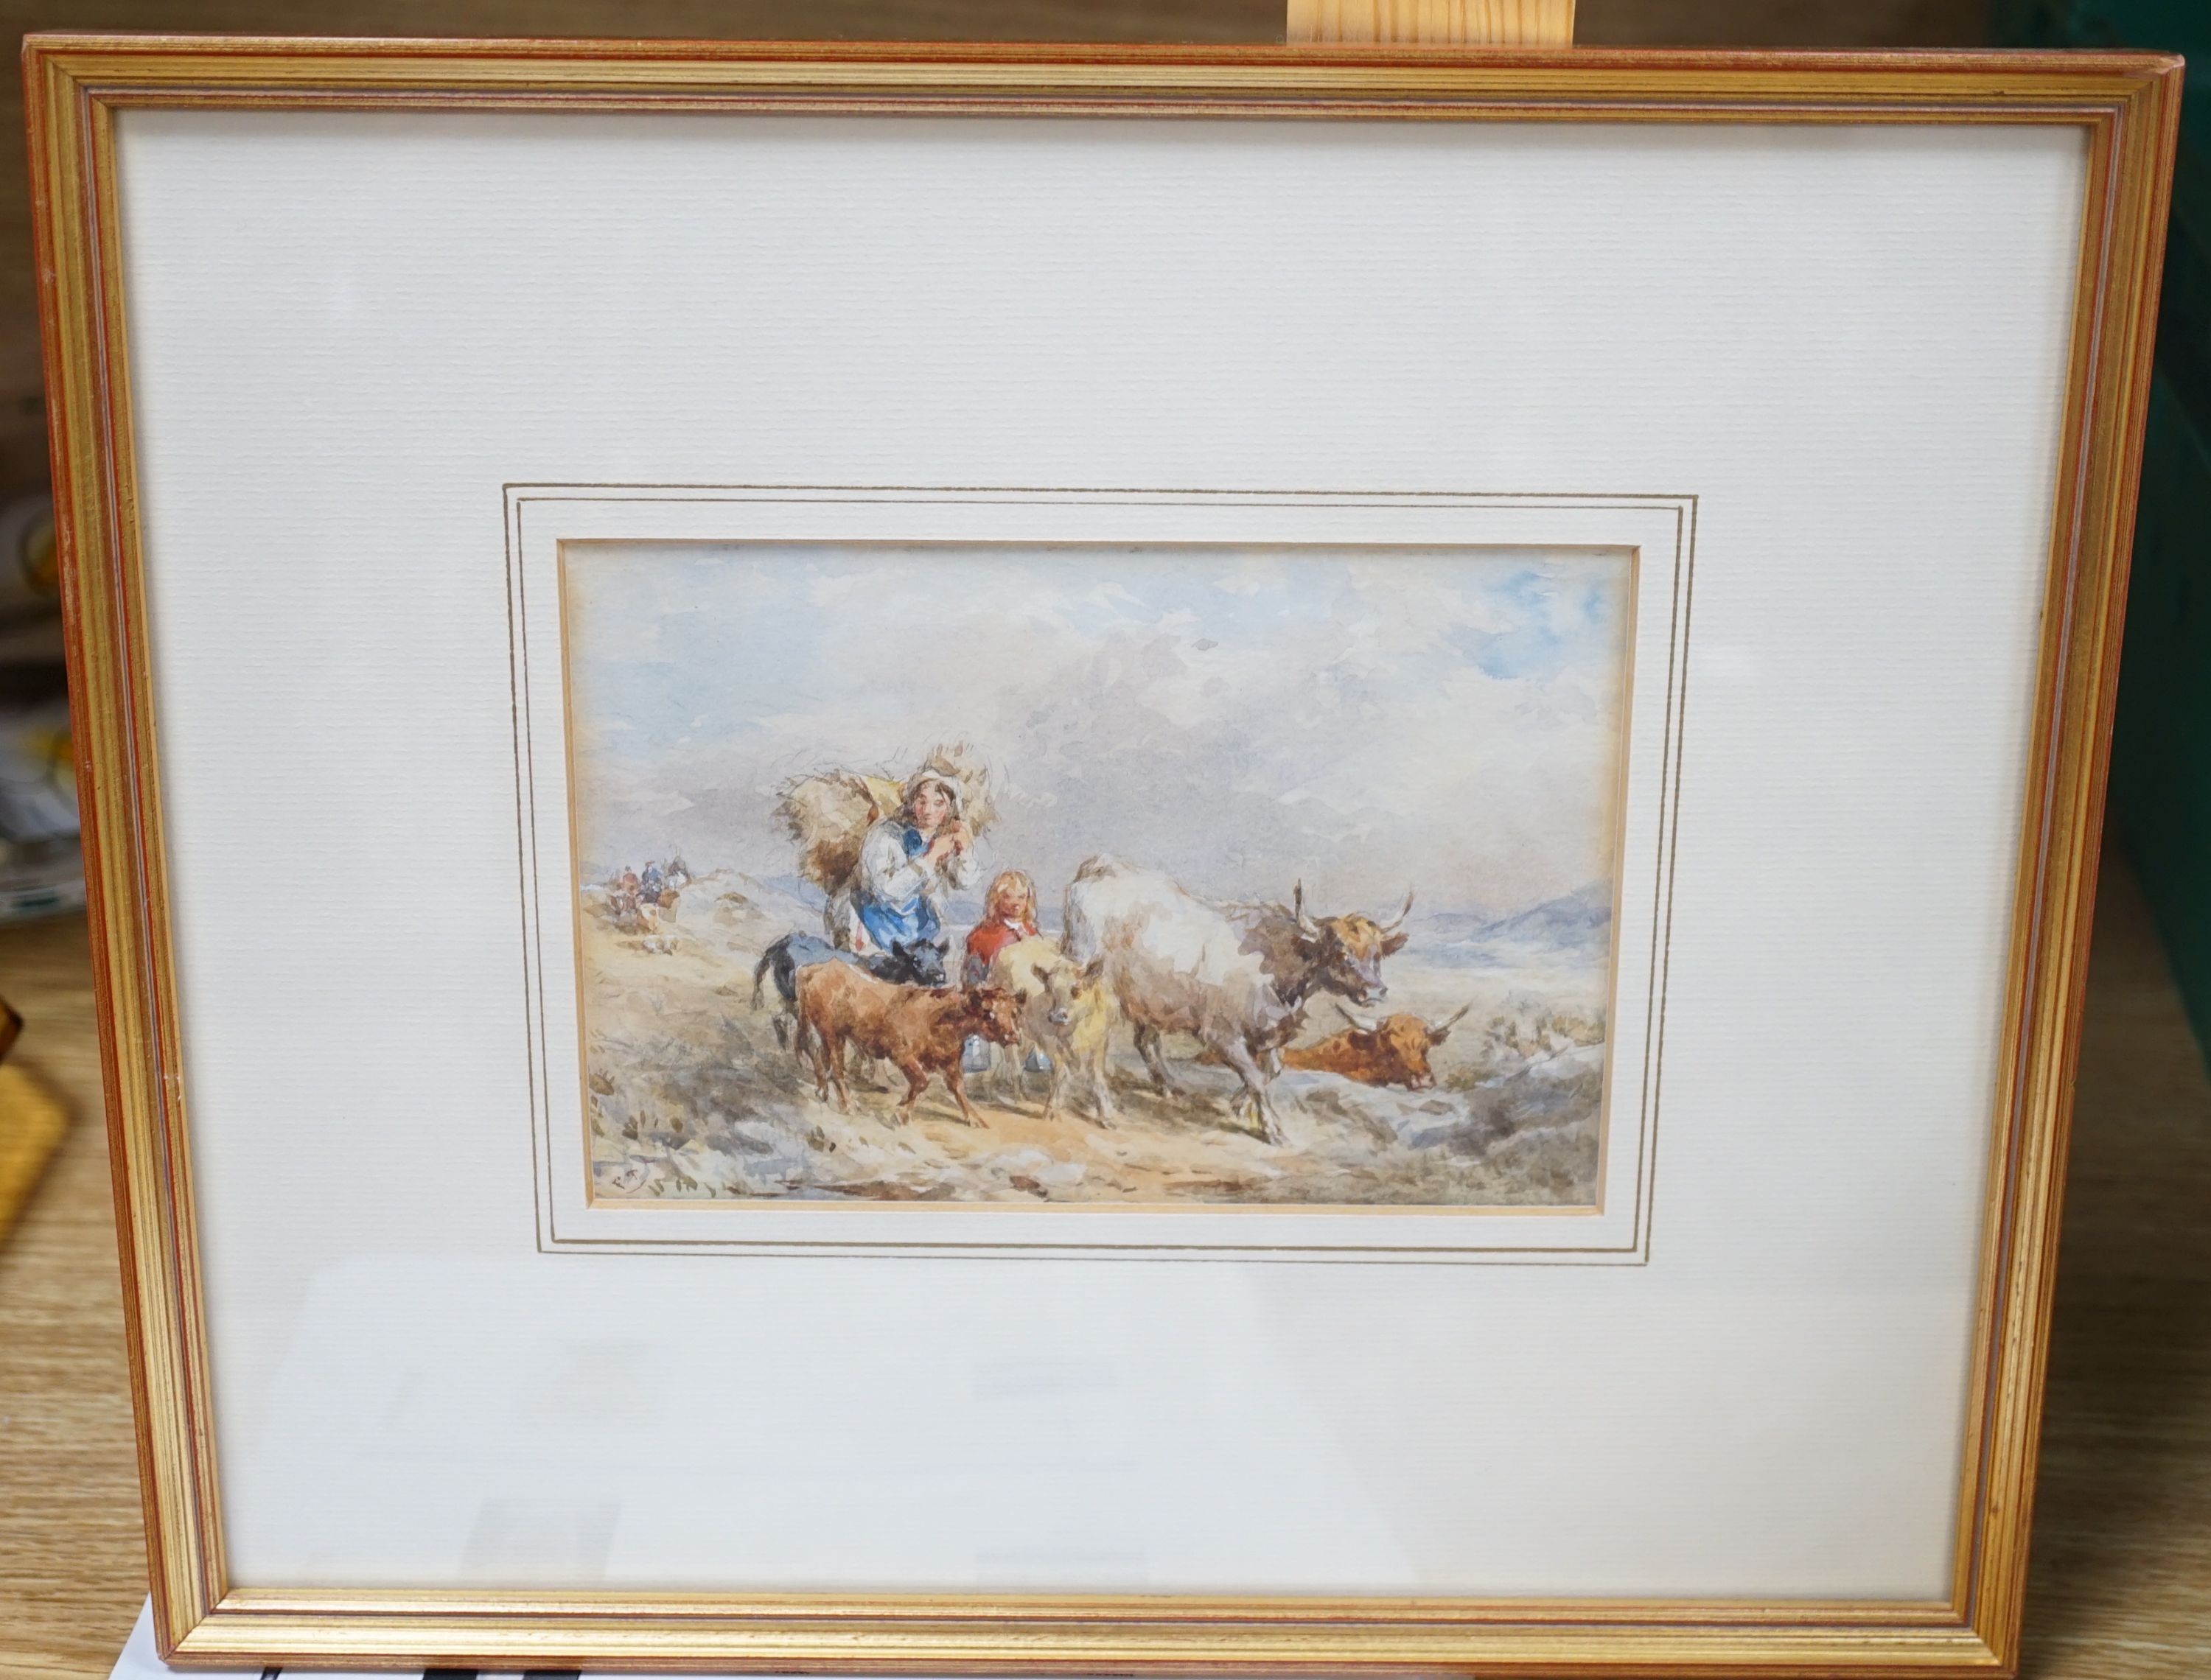 John Frederick Taylor (1802-1889), Milkmaid with cows on a country road, watercolour, signed initials, 11 x 17cm